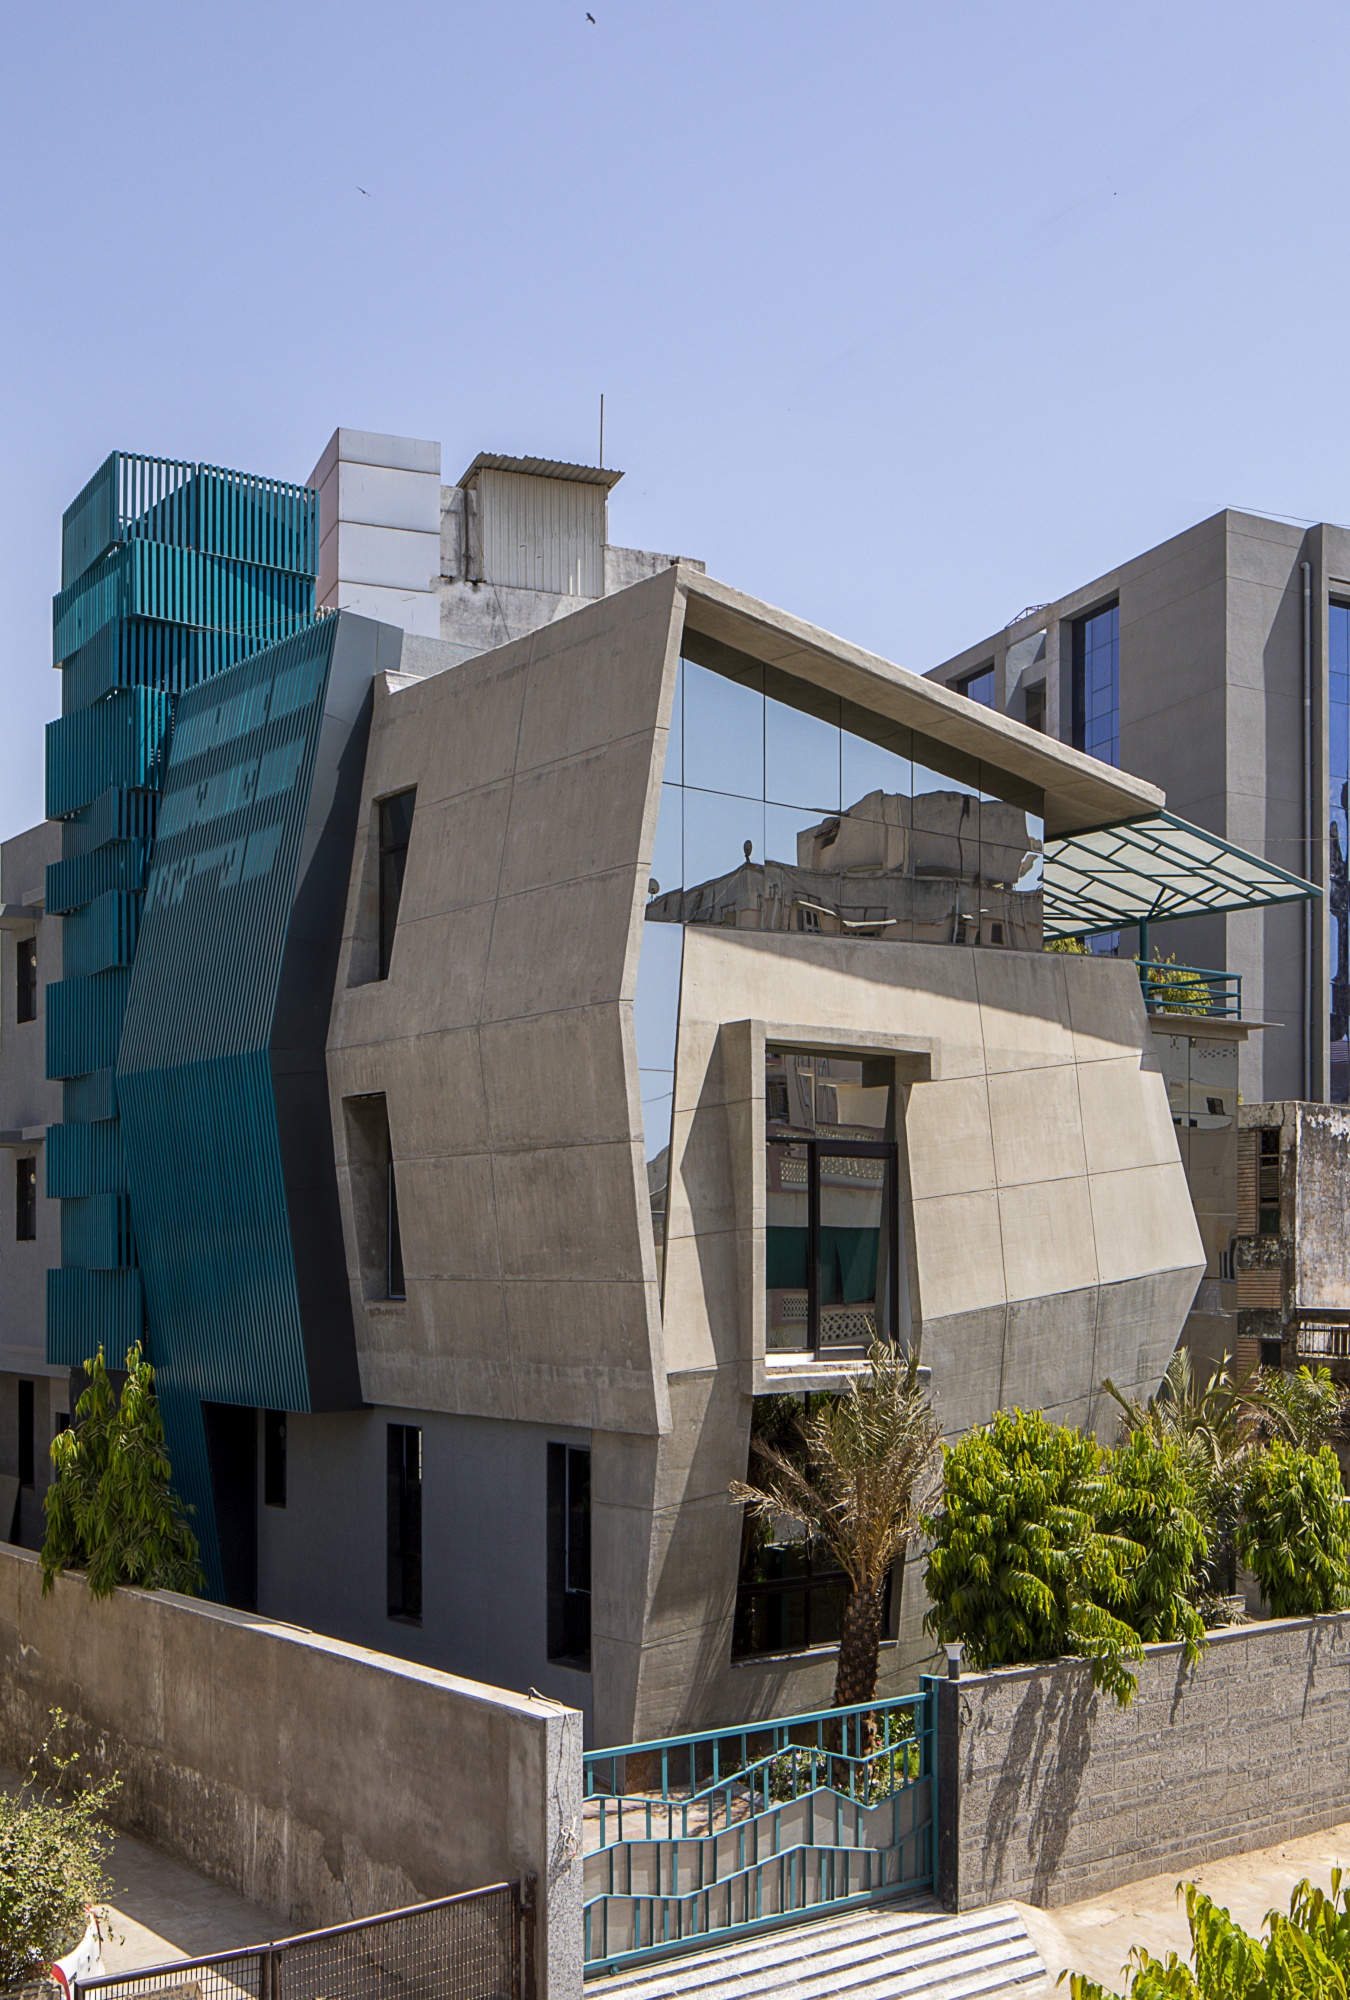 The Jagged House, Ahmedabad, by Tao Architecture